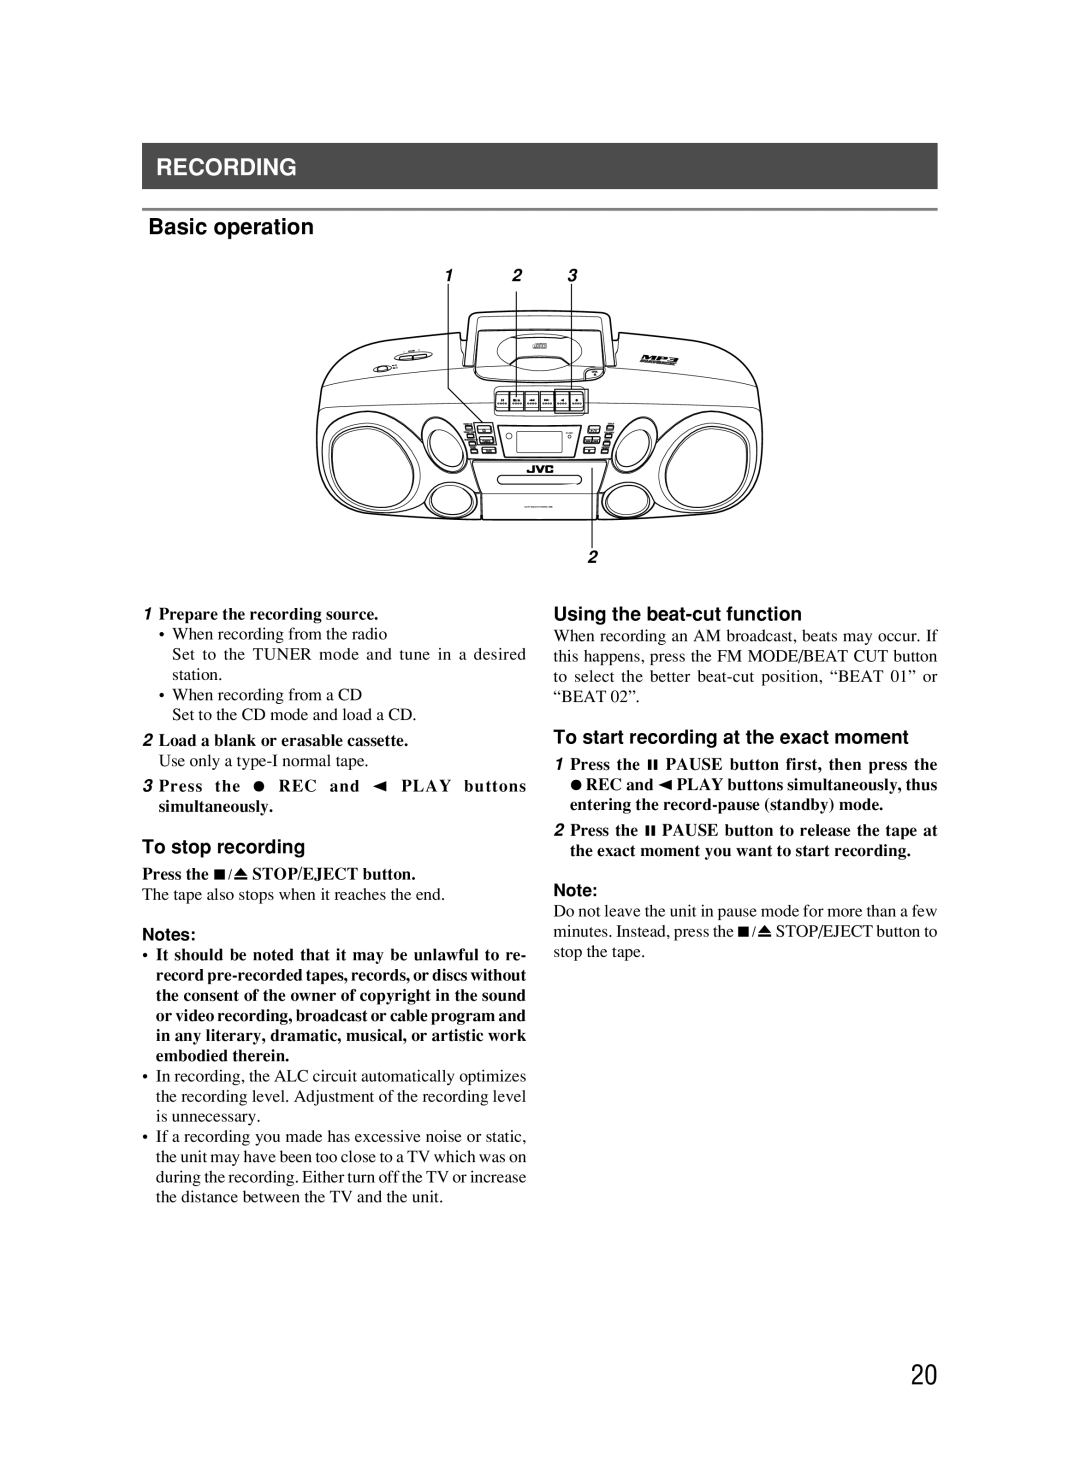 JVC RC-BM5 manual Recording, To stop recording, Using the beat-cutfunction, To start recording at the exact moment 